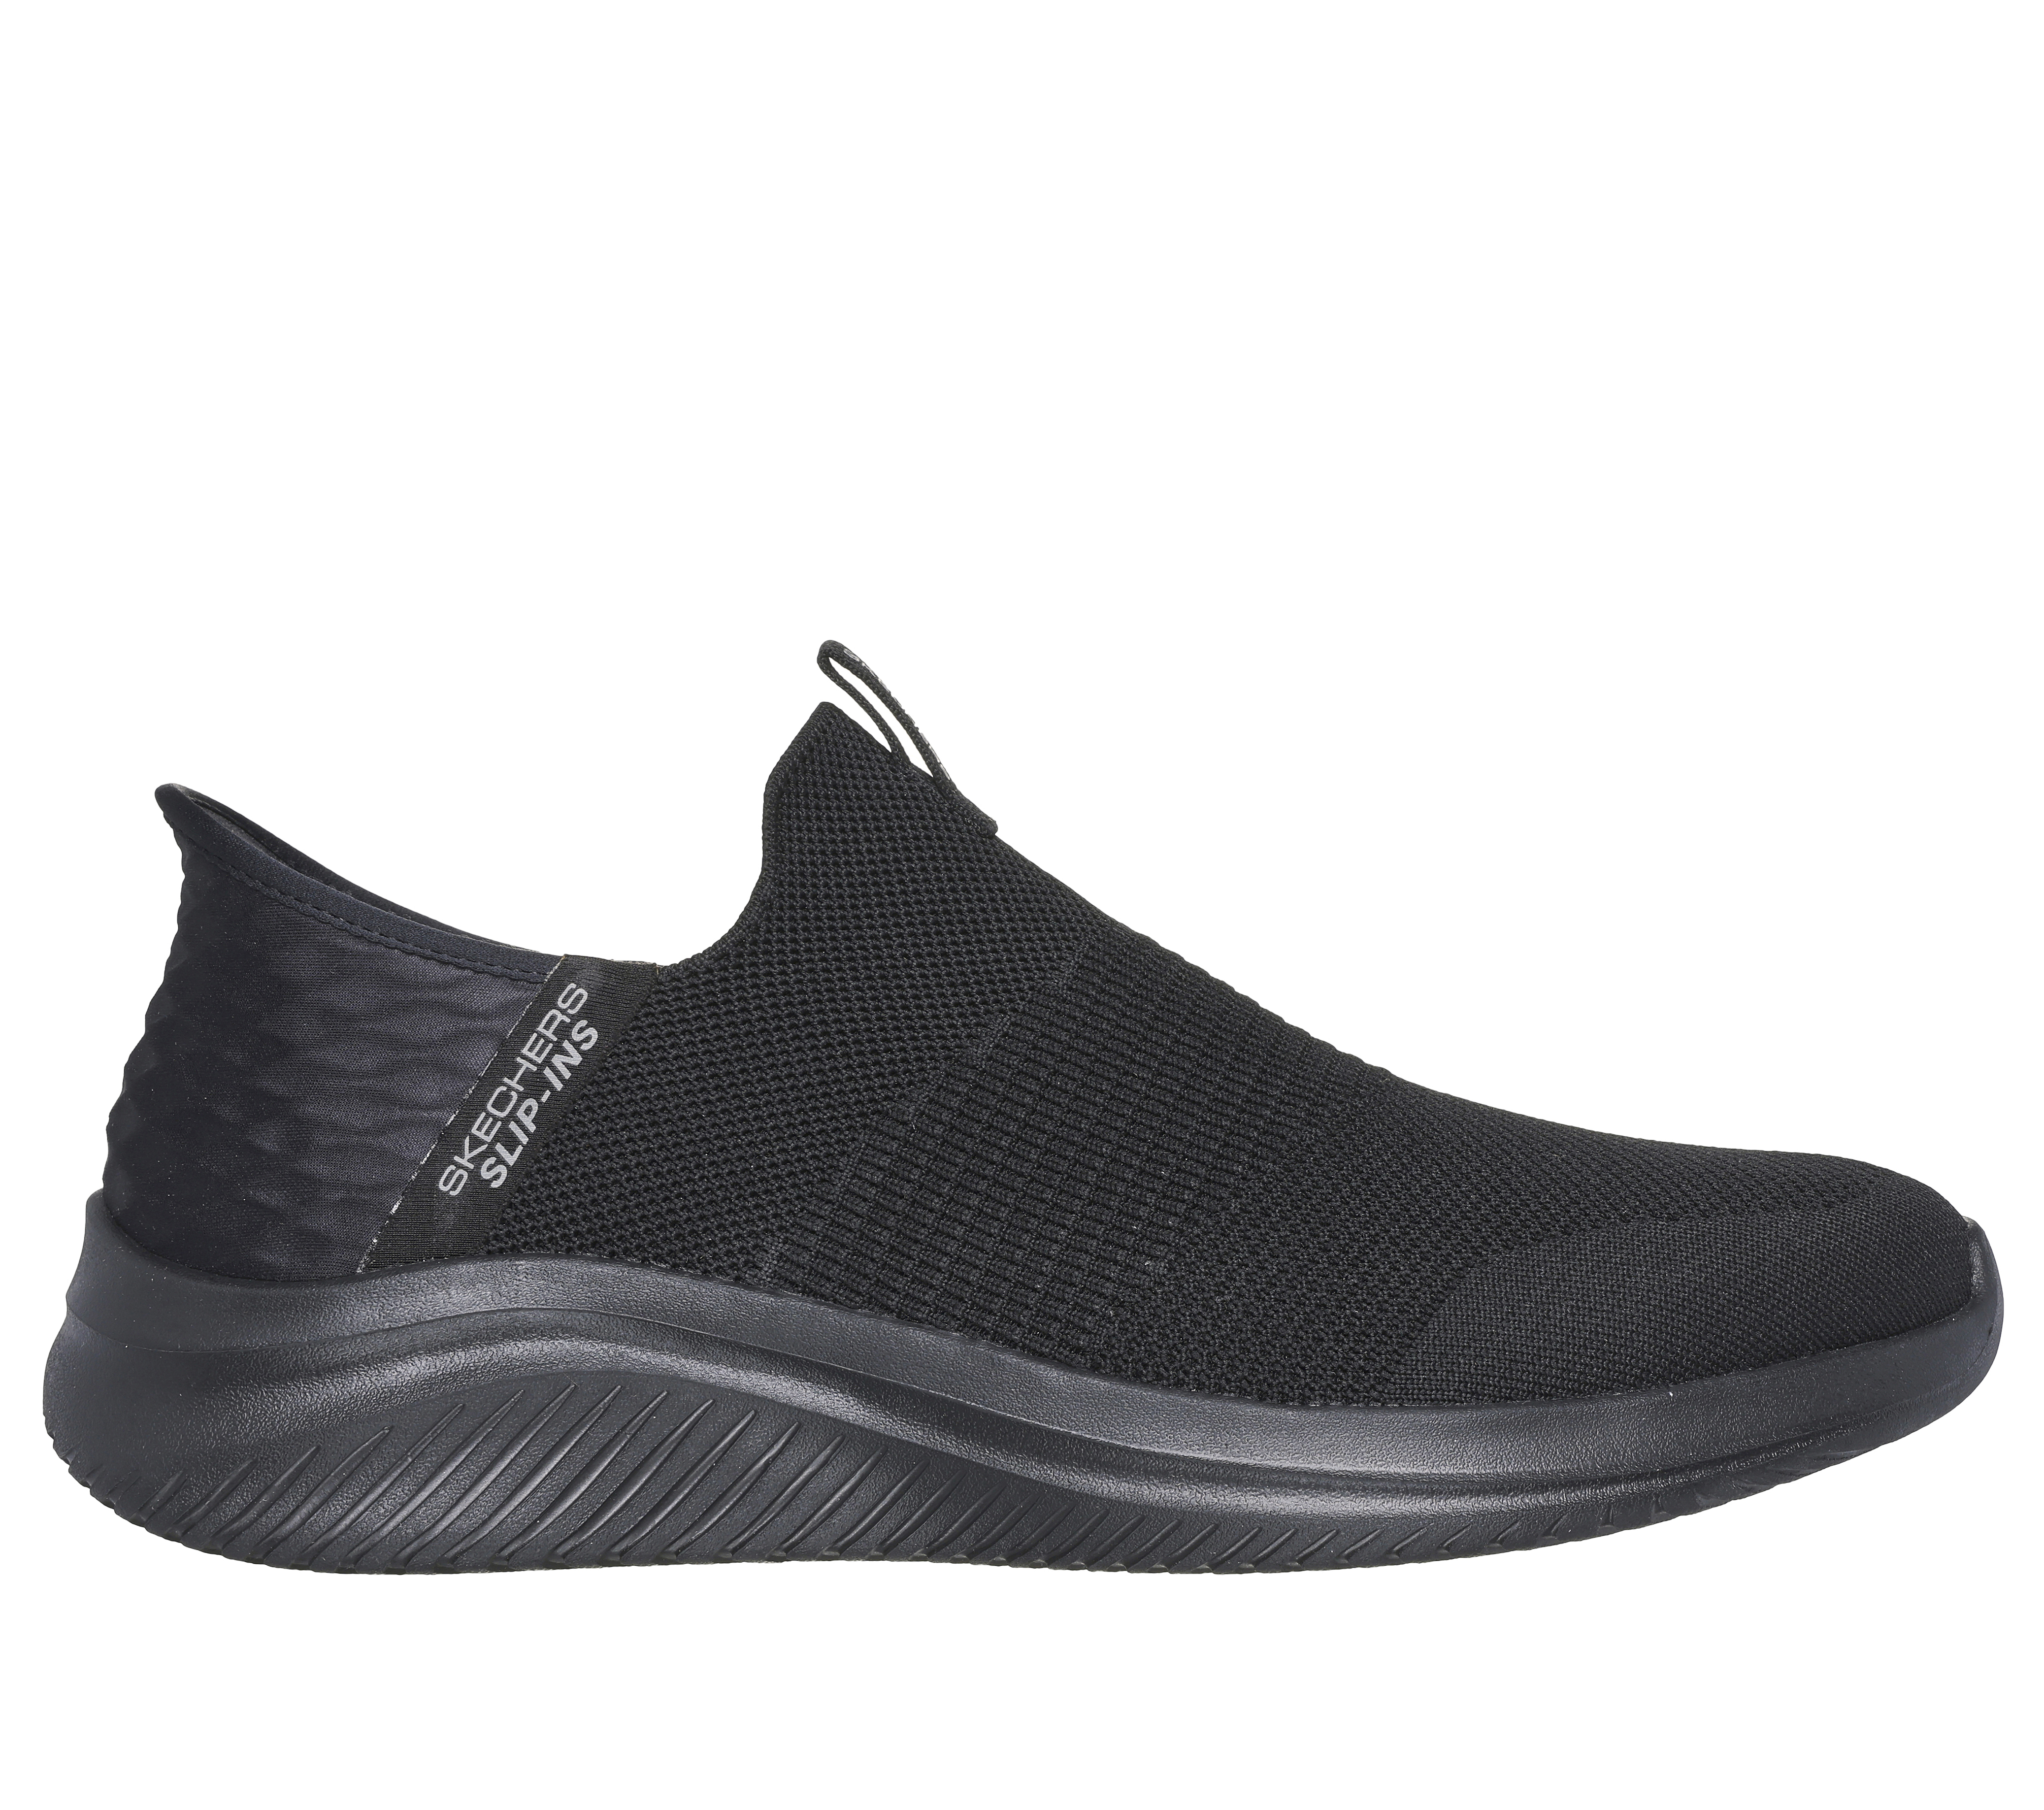 What Stores Carry Skechers Slip-ons?